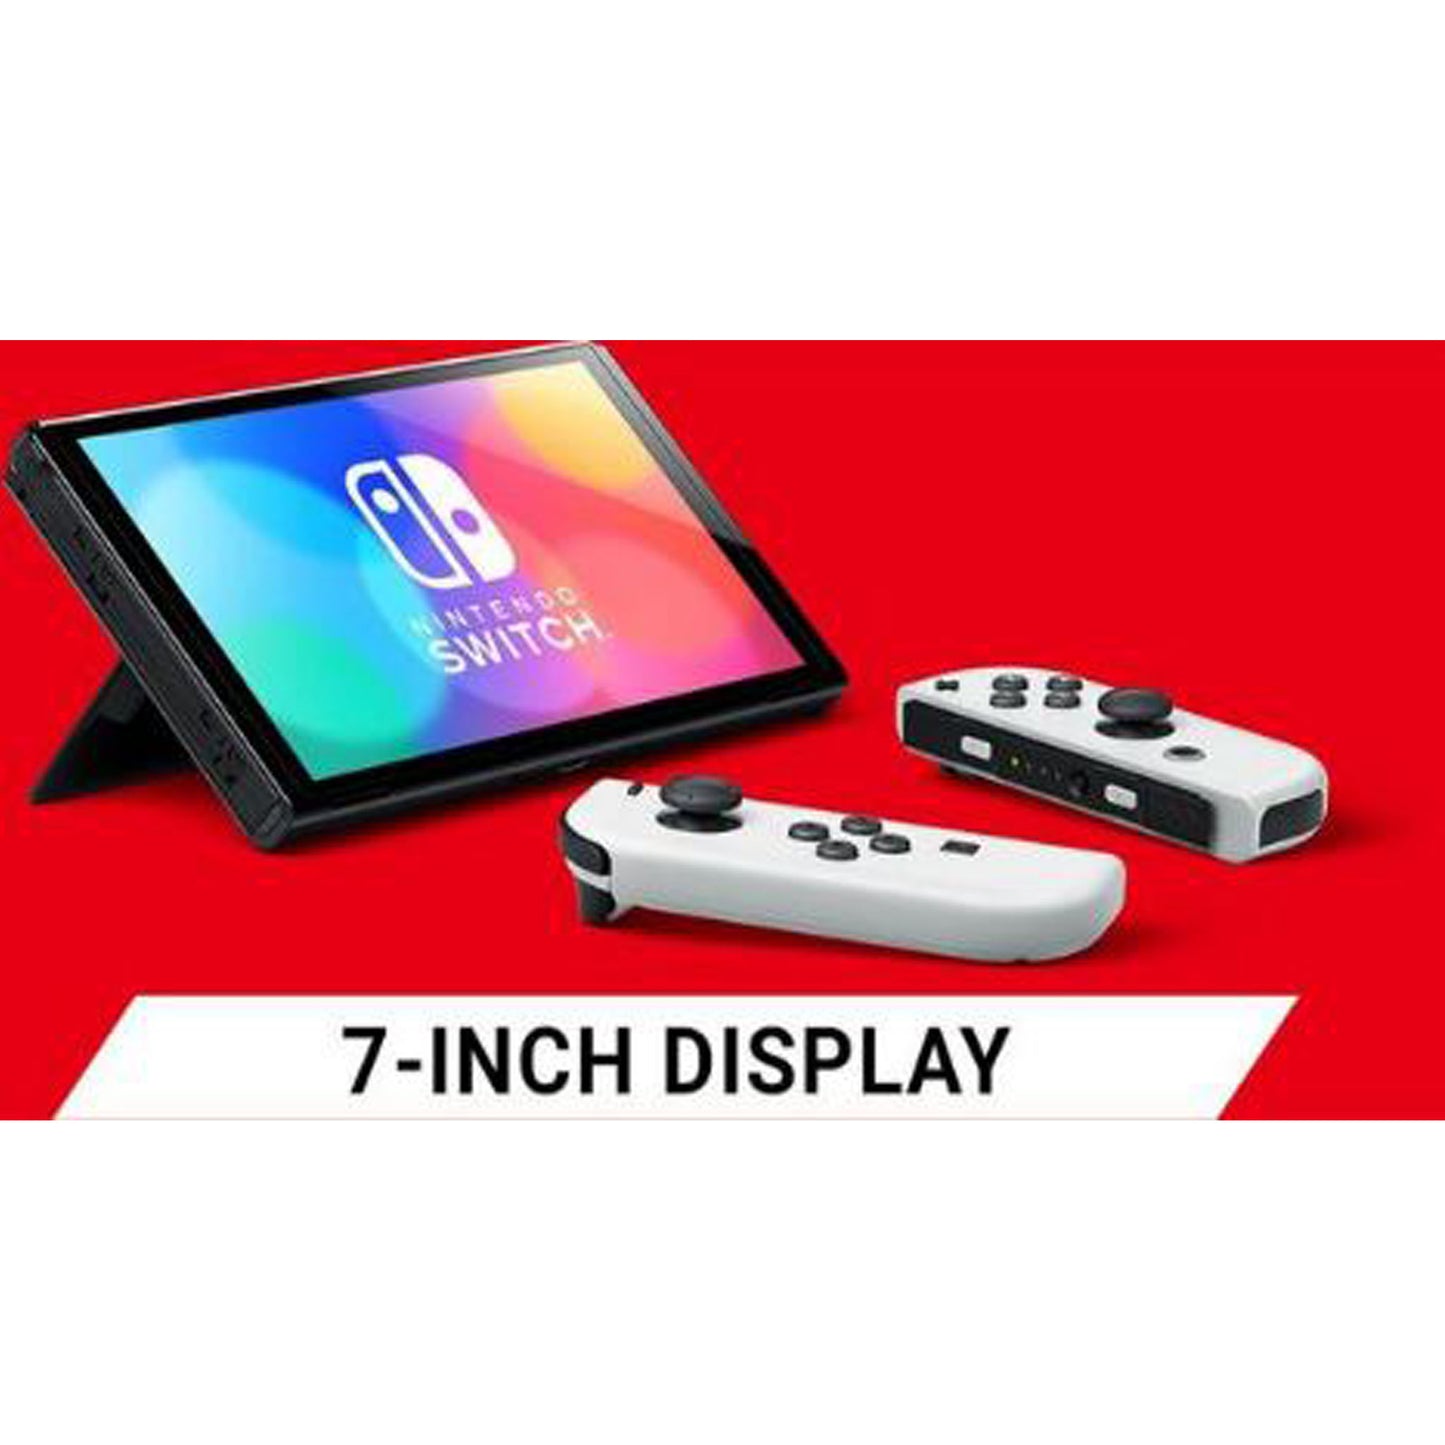 NINTENDO Switch OLED, FIFA 23 & 256 GB Memory Card Bundle - Neon Red & Blue